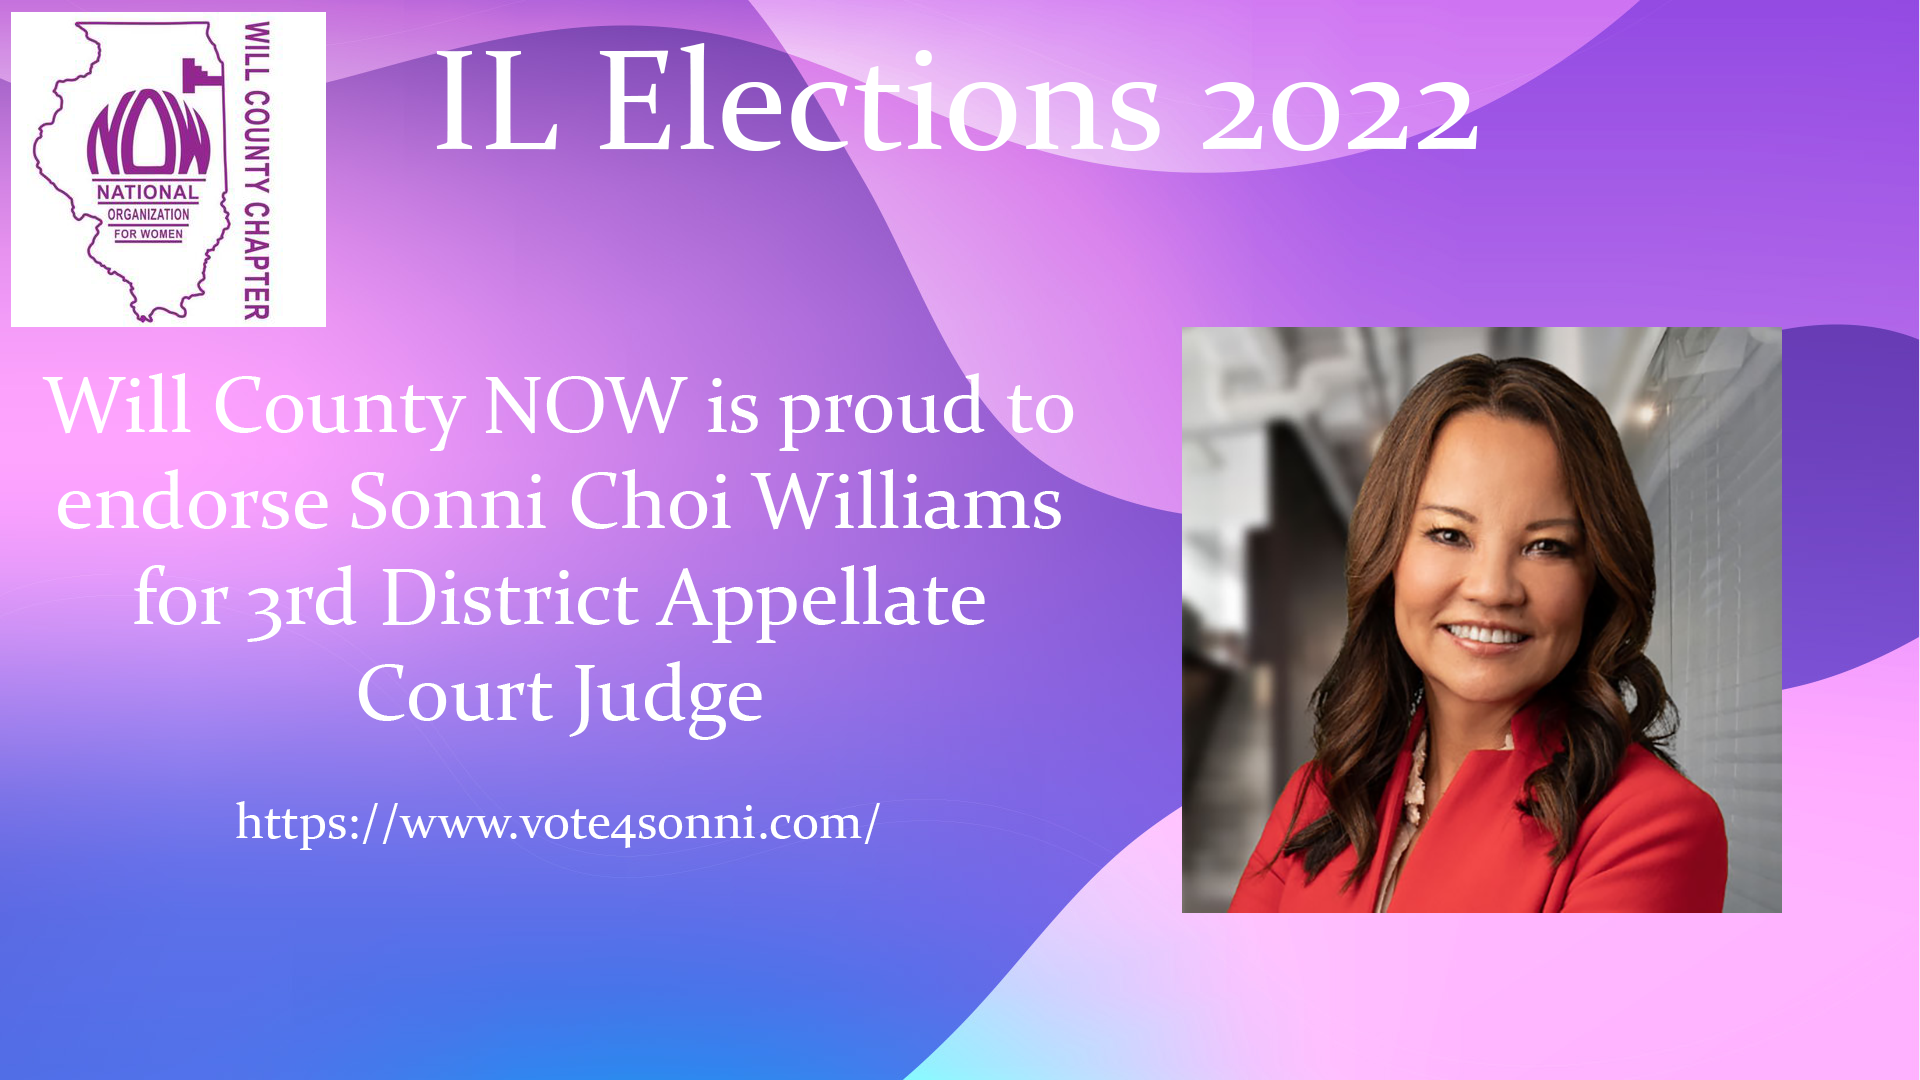 Will County NOW Endorses Sonni Choi Williams for 3rd District Appellate Court Judge